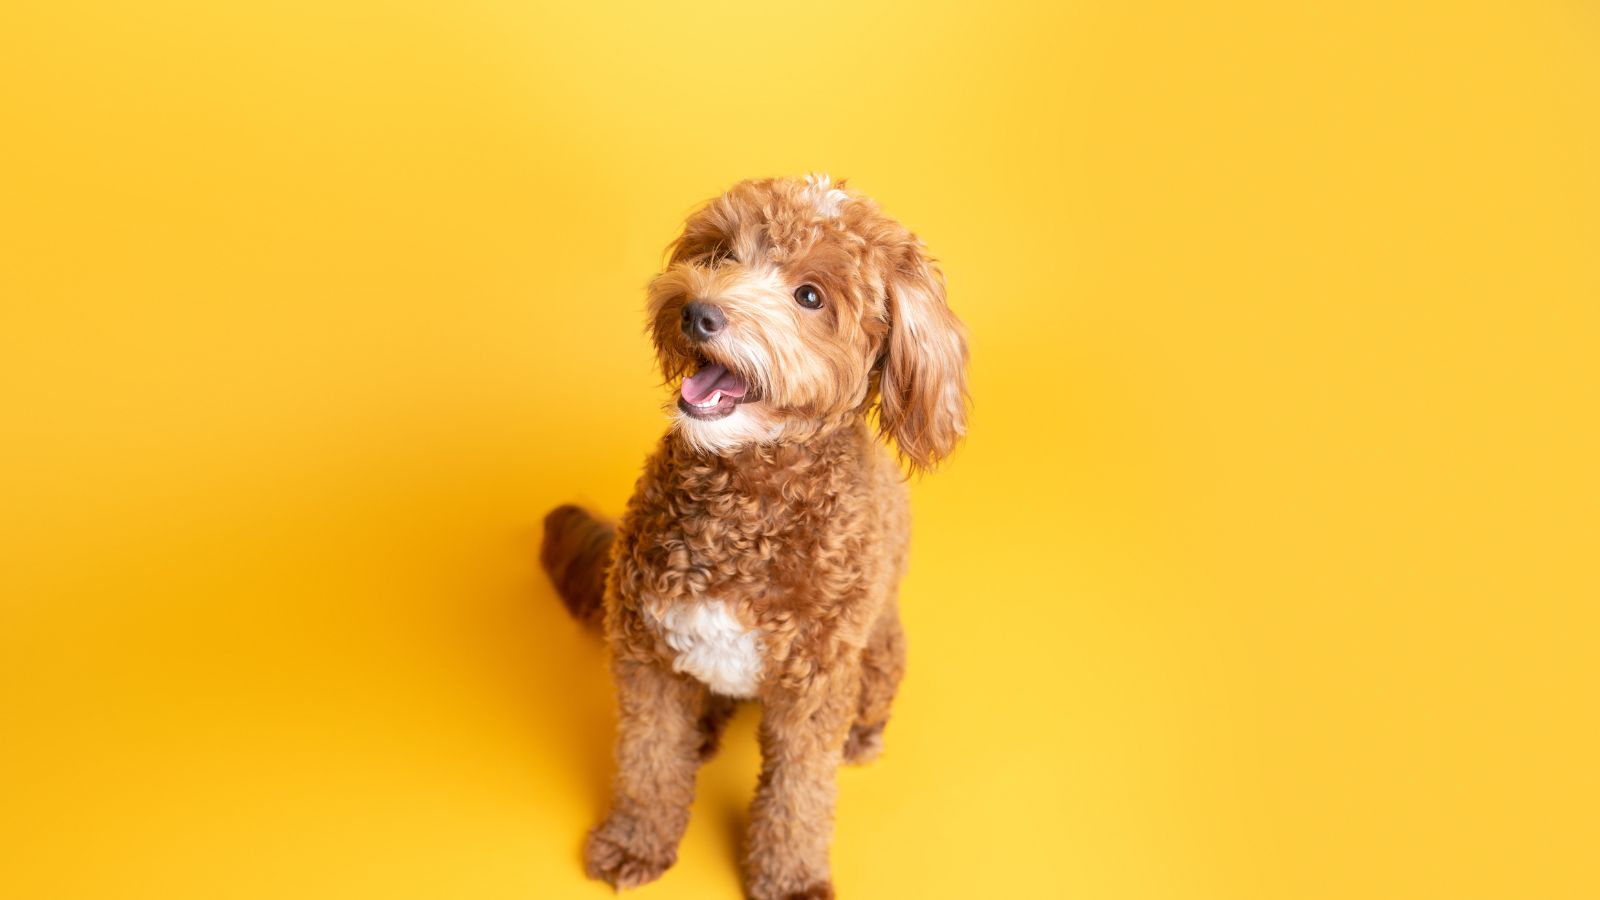 Photoshoot of a cute mini golden doodle